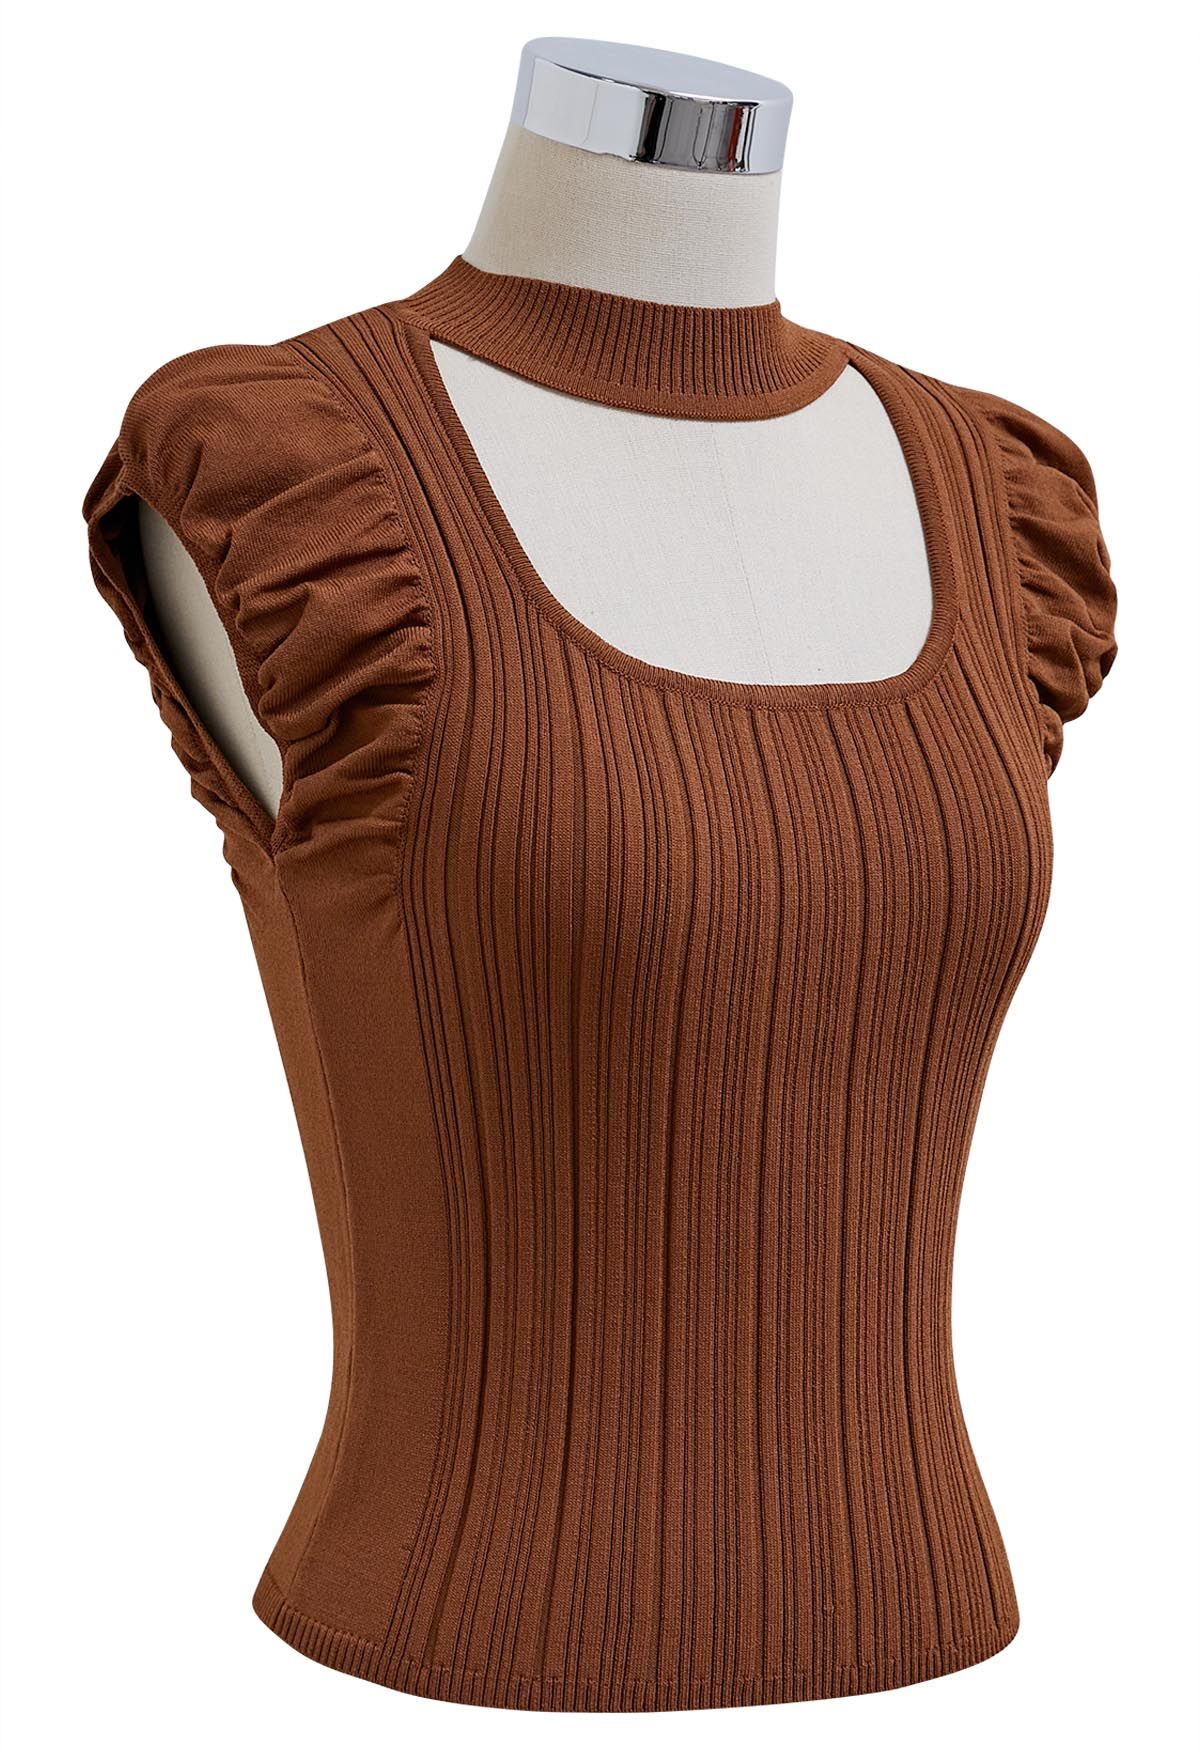 Choker Neck Ruched Cap Sleeves Knit Top in Rust